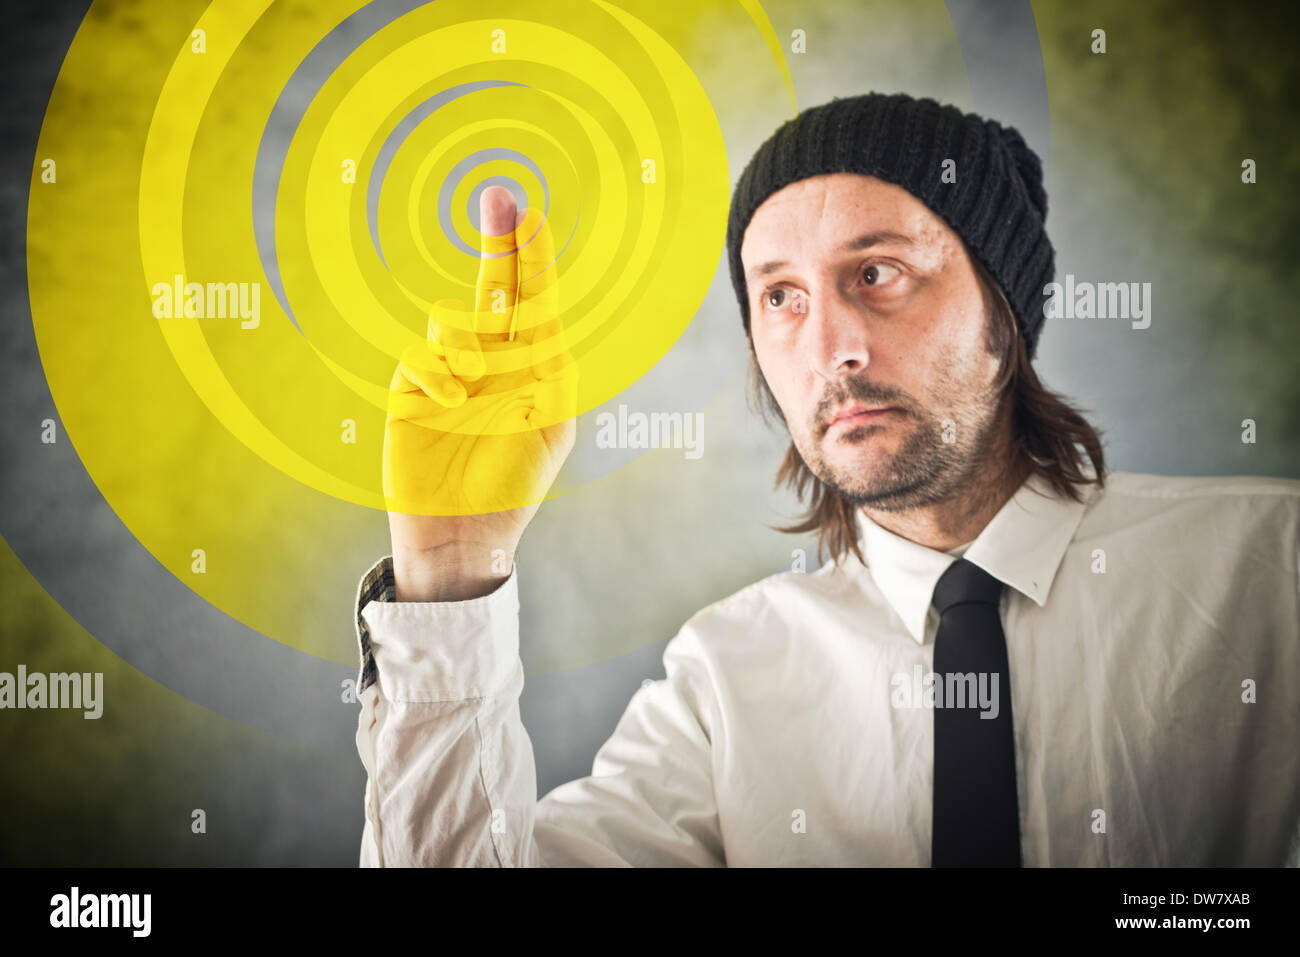 Graphic designer pressing touch screen button and starting creative process Stock Photo